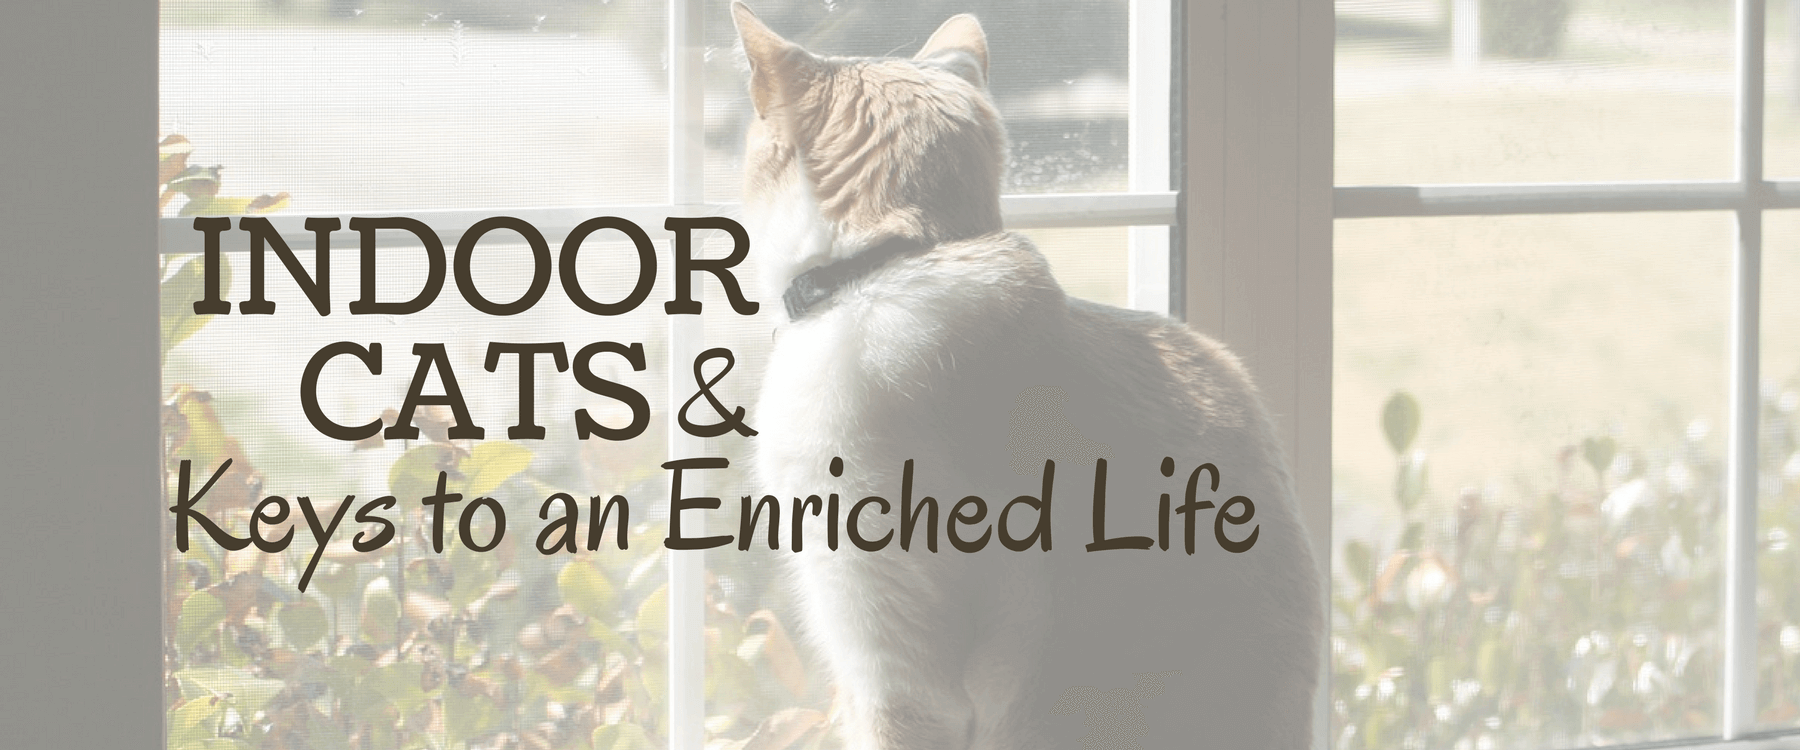 Indoor Cats: The Keys to an Enriched Life